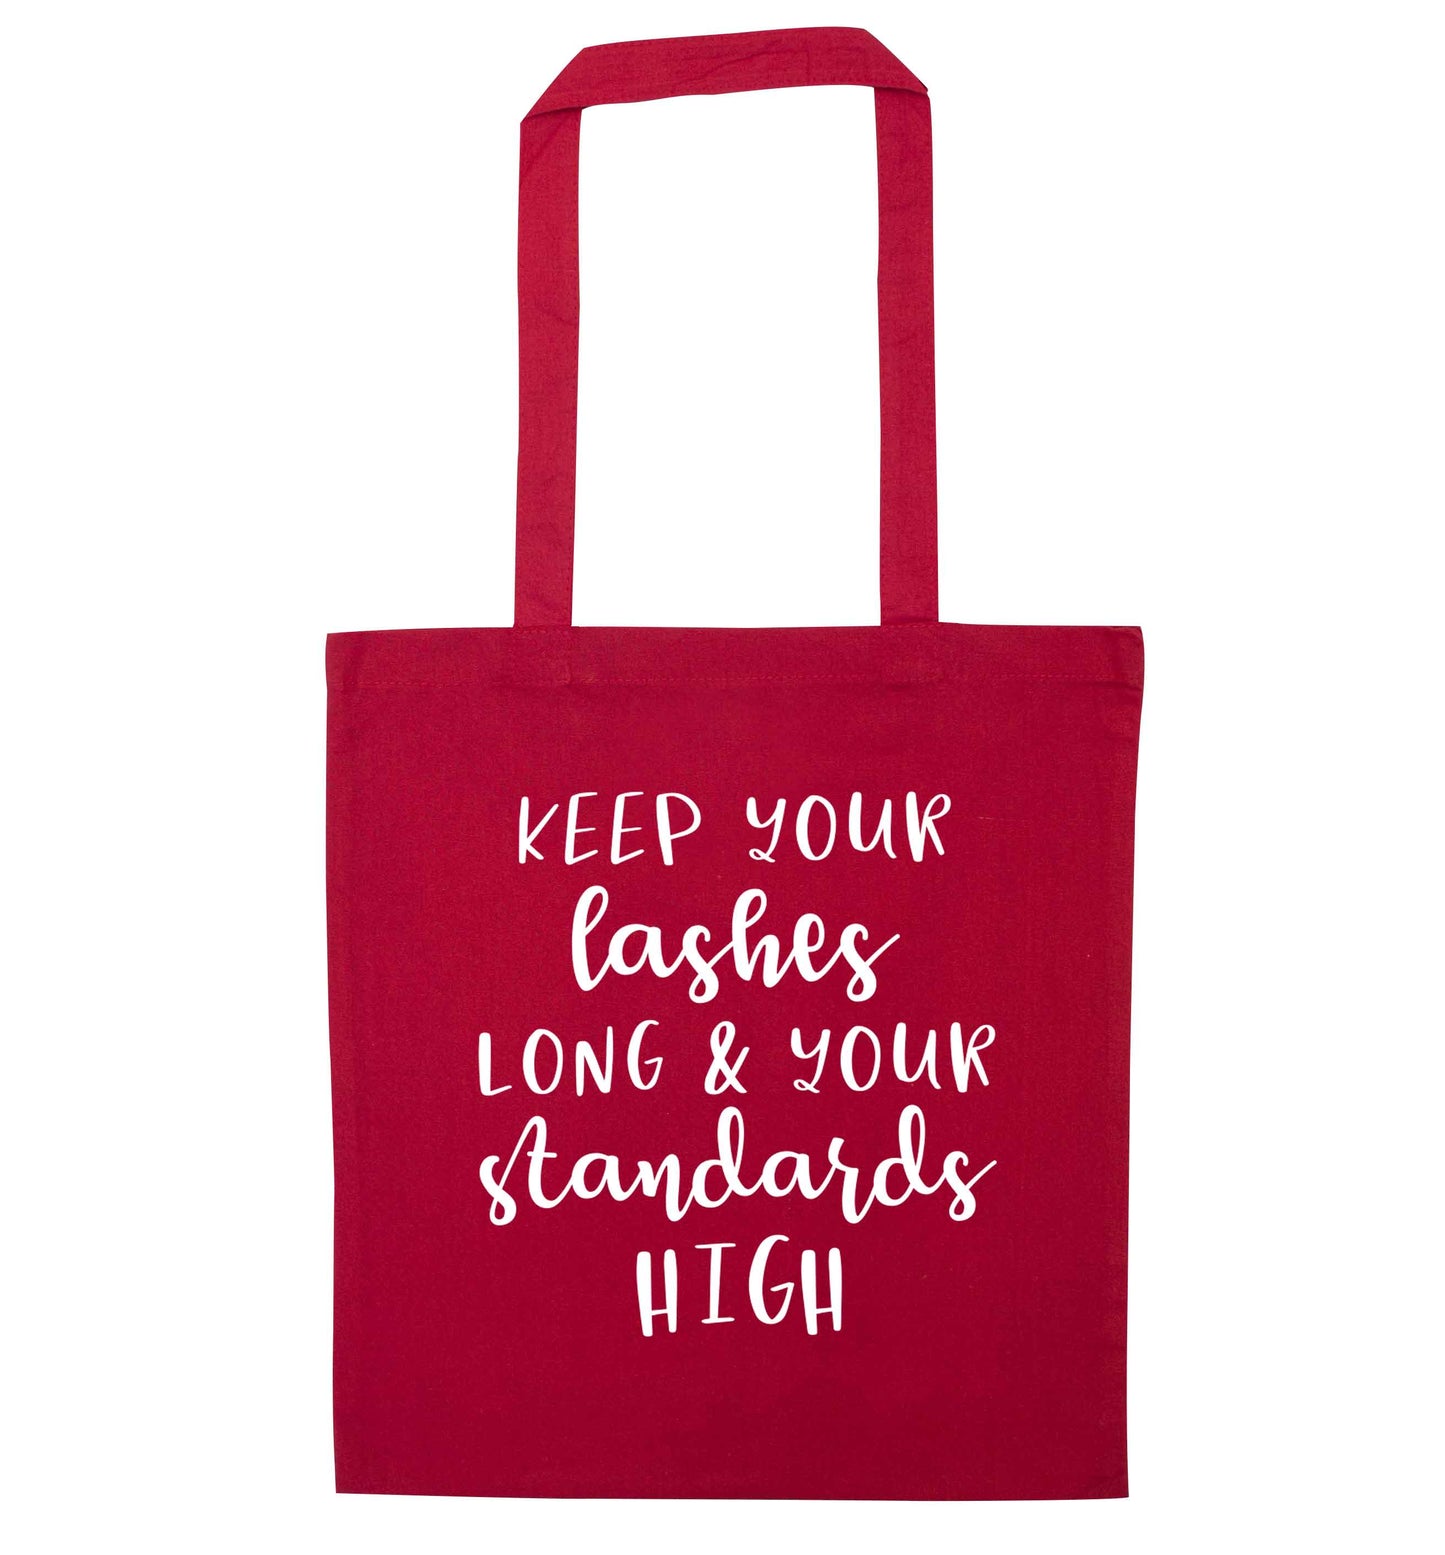 Keep your lashes long and your standards high red tote bag